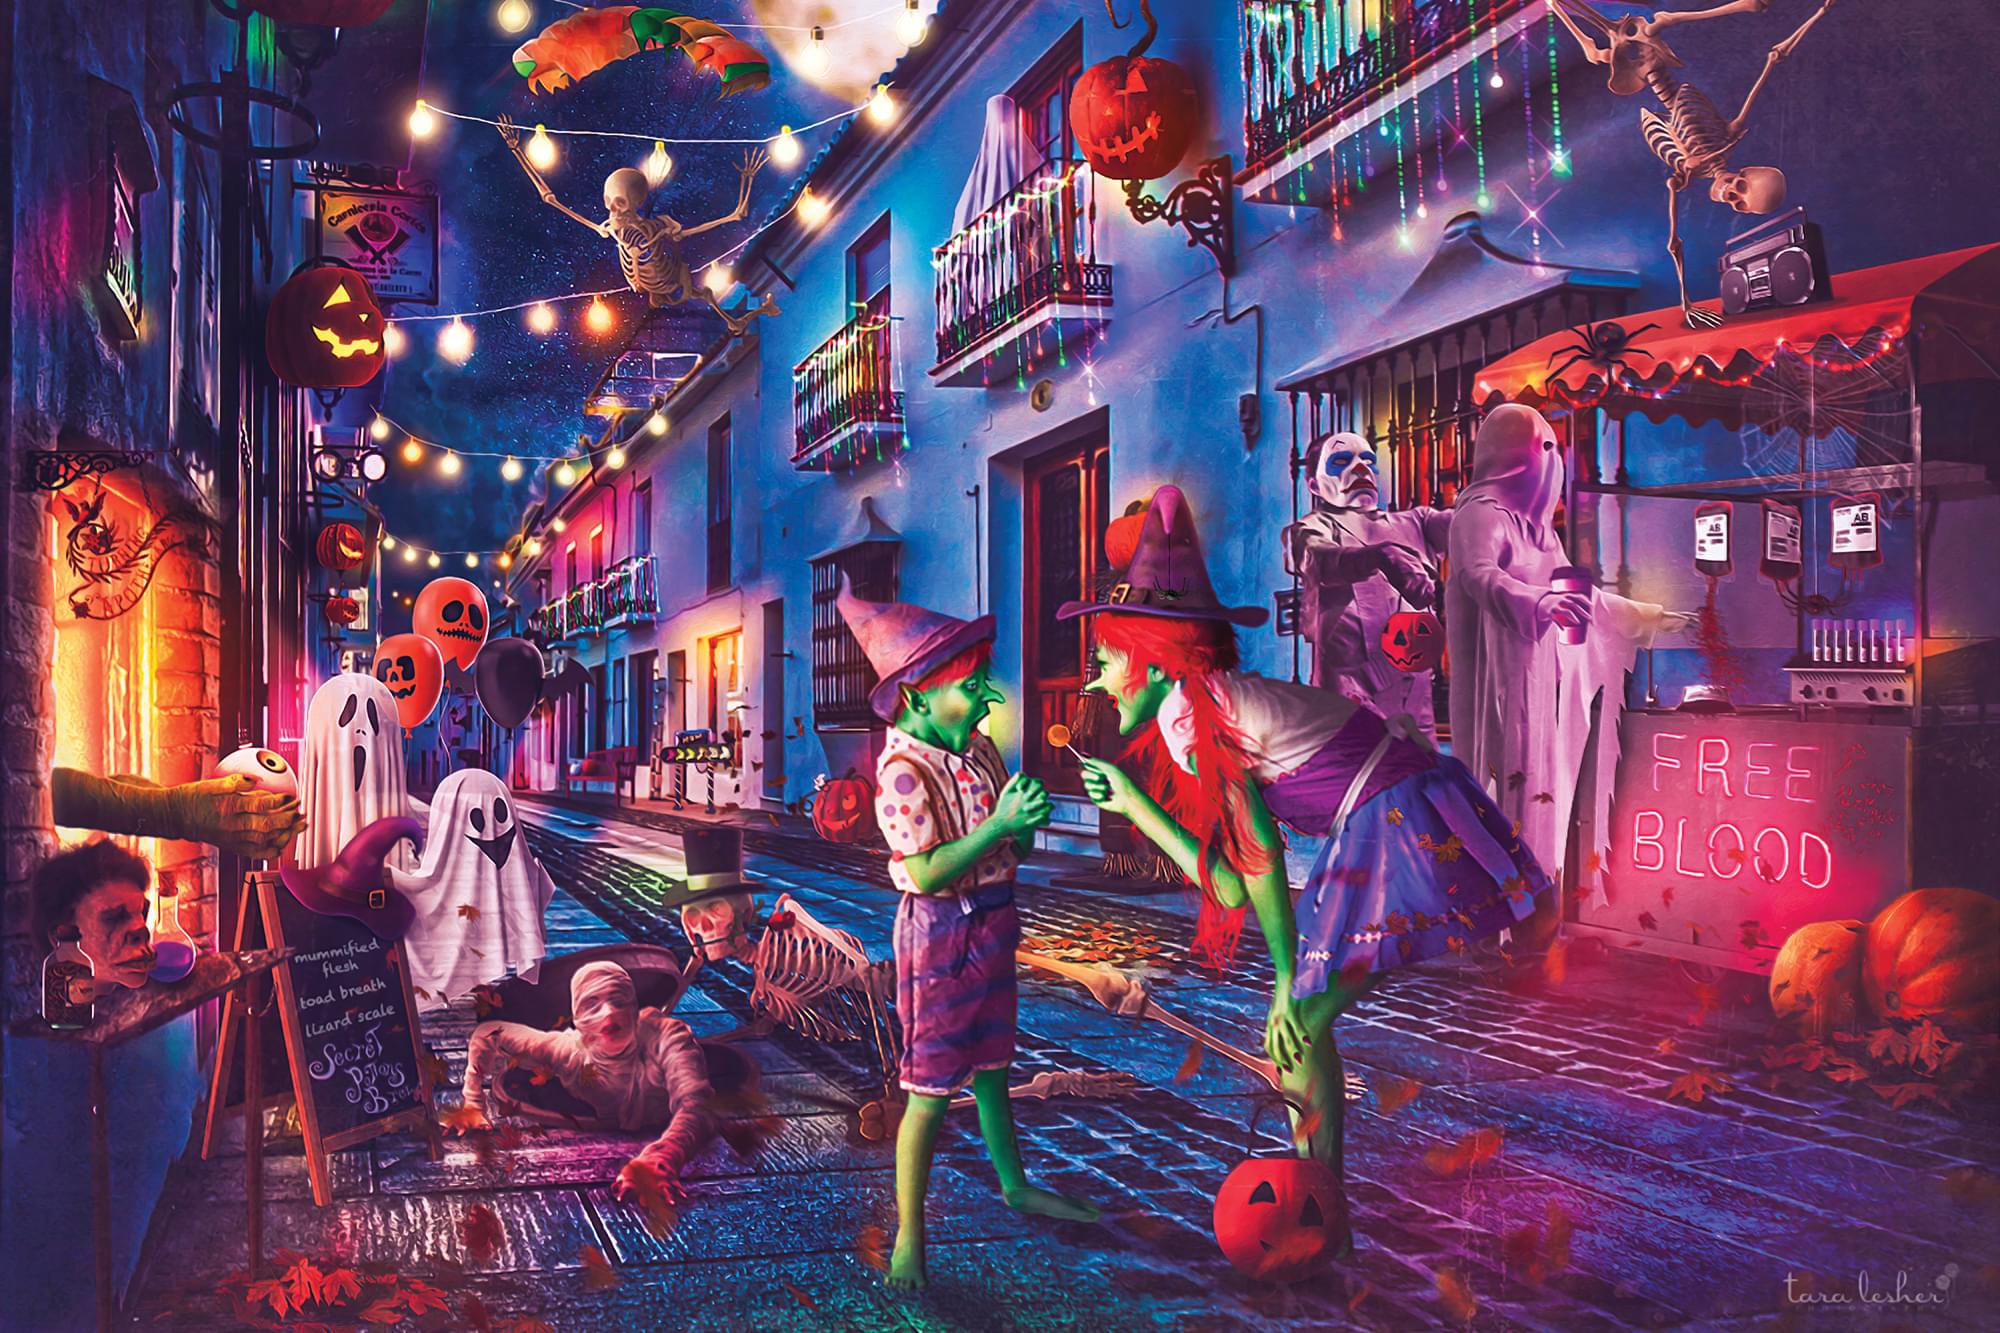 Boo Boulevard Halloween Puzzle by Tara Lesher | 1000 Piece Jigsaw Puzzle - image 1 of 7